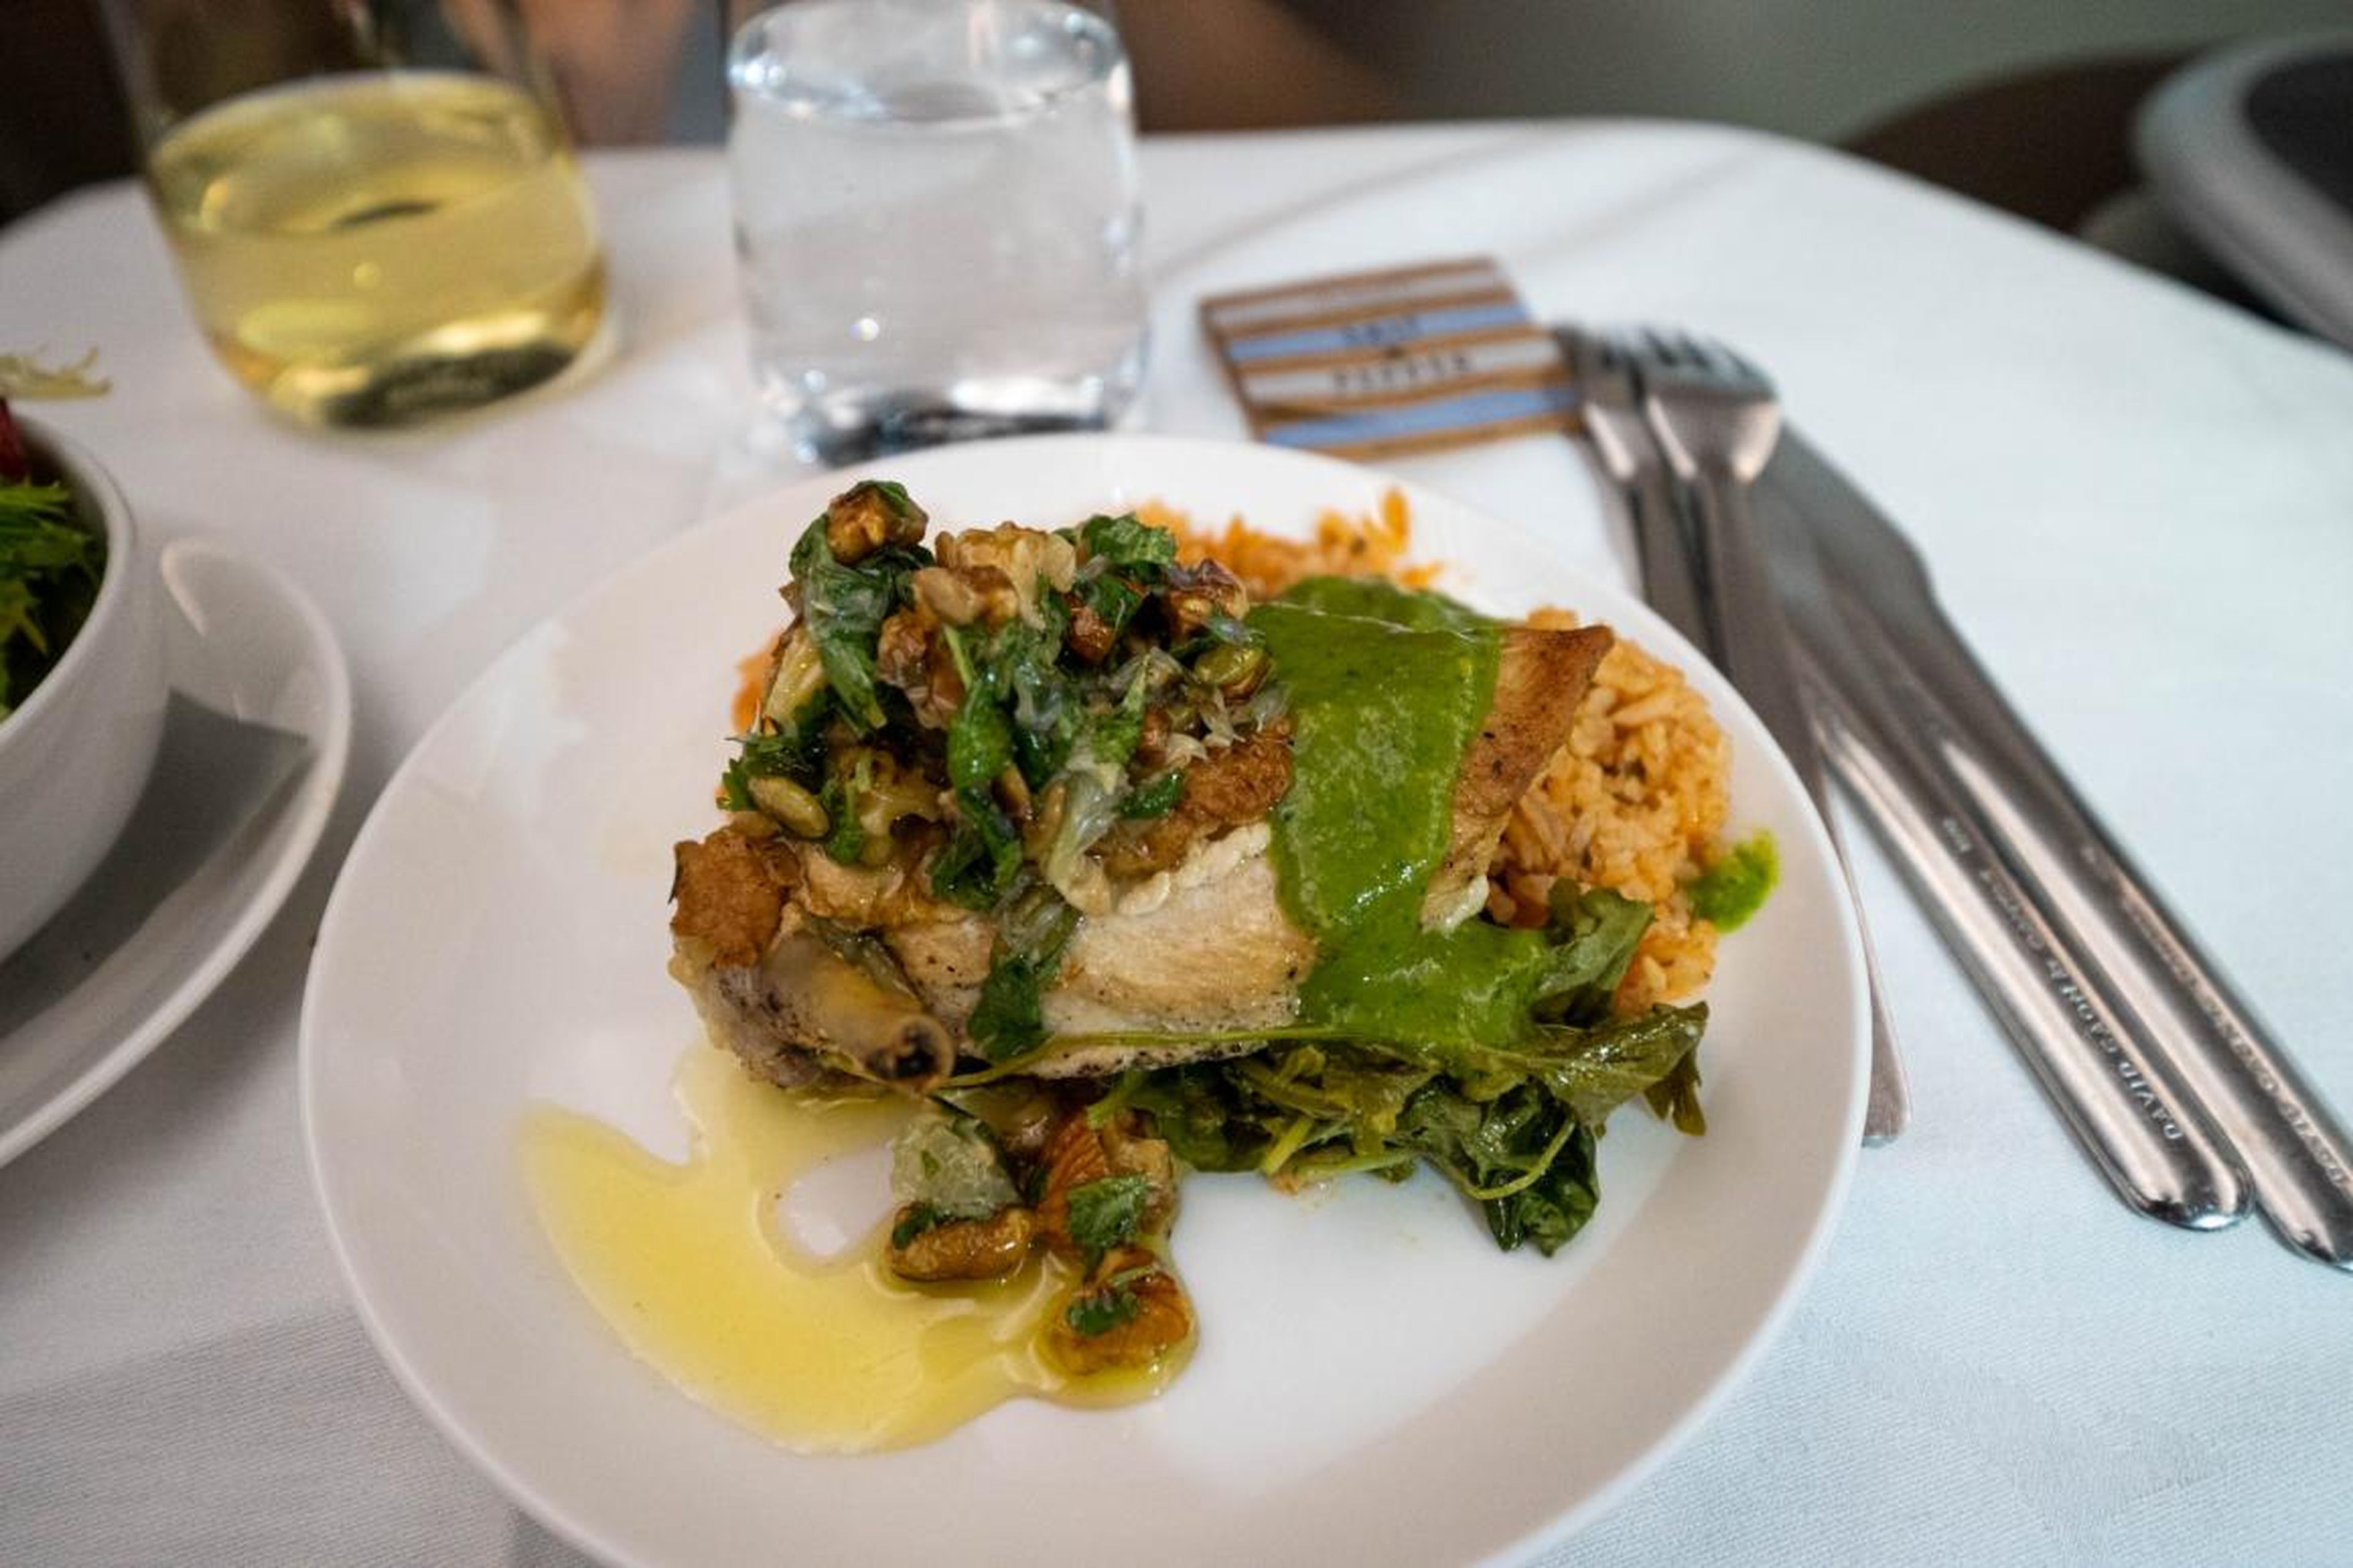 For the main course, I had the chicken breast with Spanish rice, kale, tomatillo sauce, and pepita salsa. This was genuinely phenomenal. I was blown away by how tasty it was.